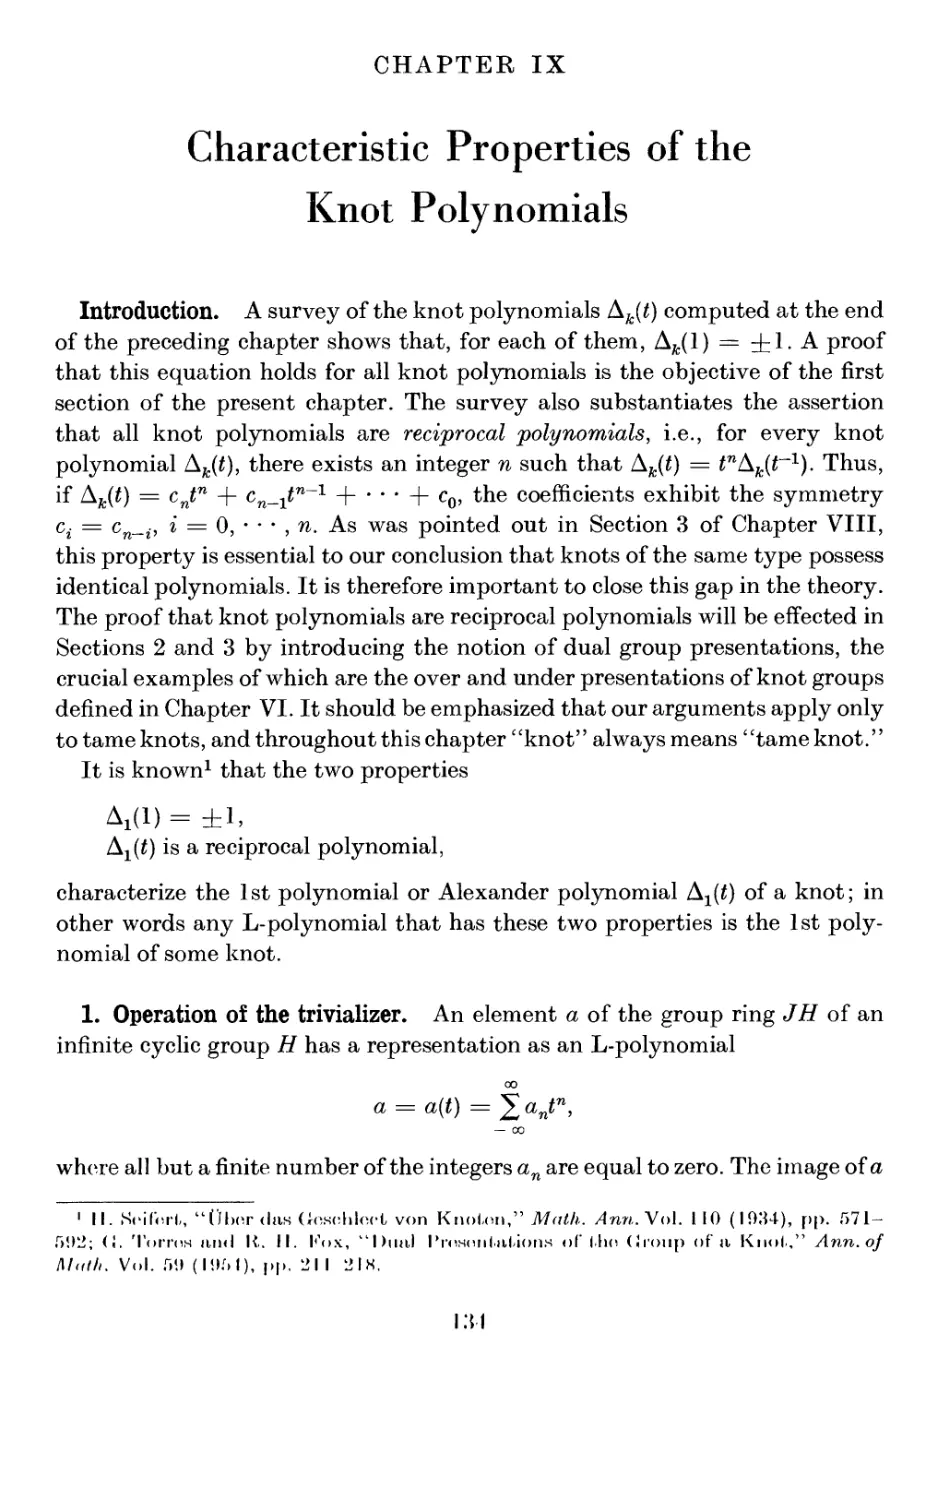 IX Characteristic Properties of the Knot Polynomials
1. Operation of the trivializer